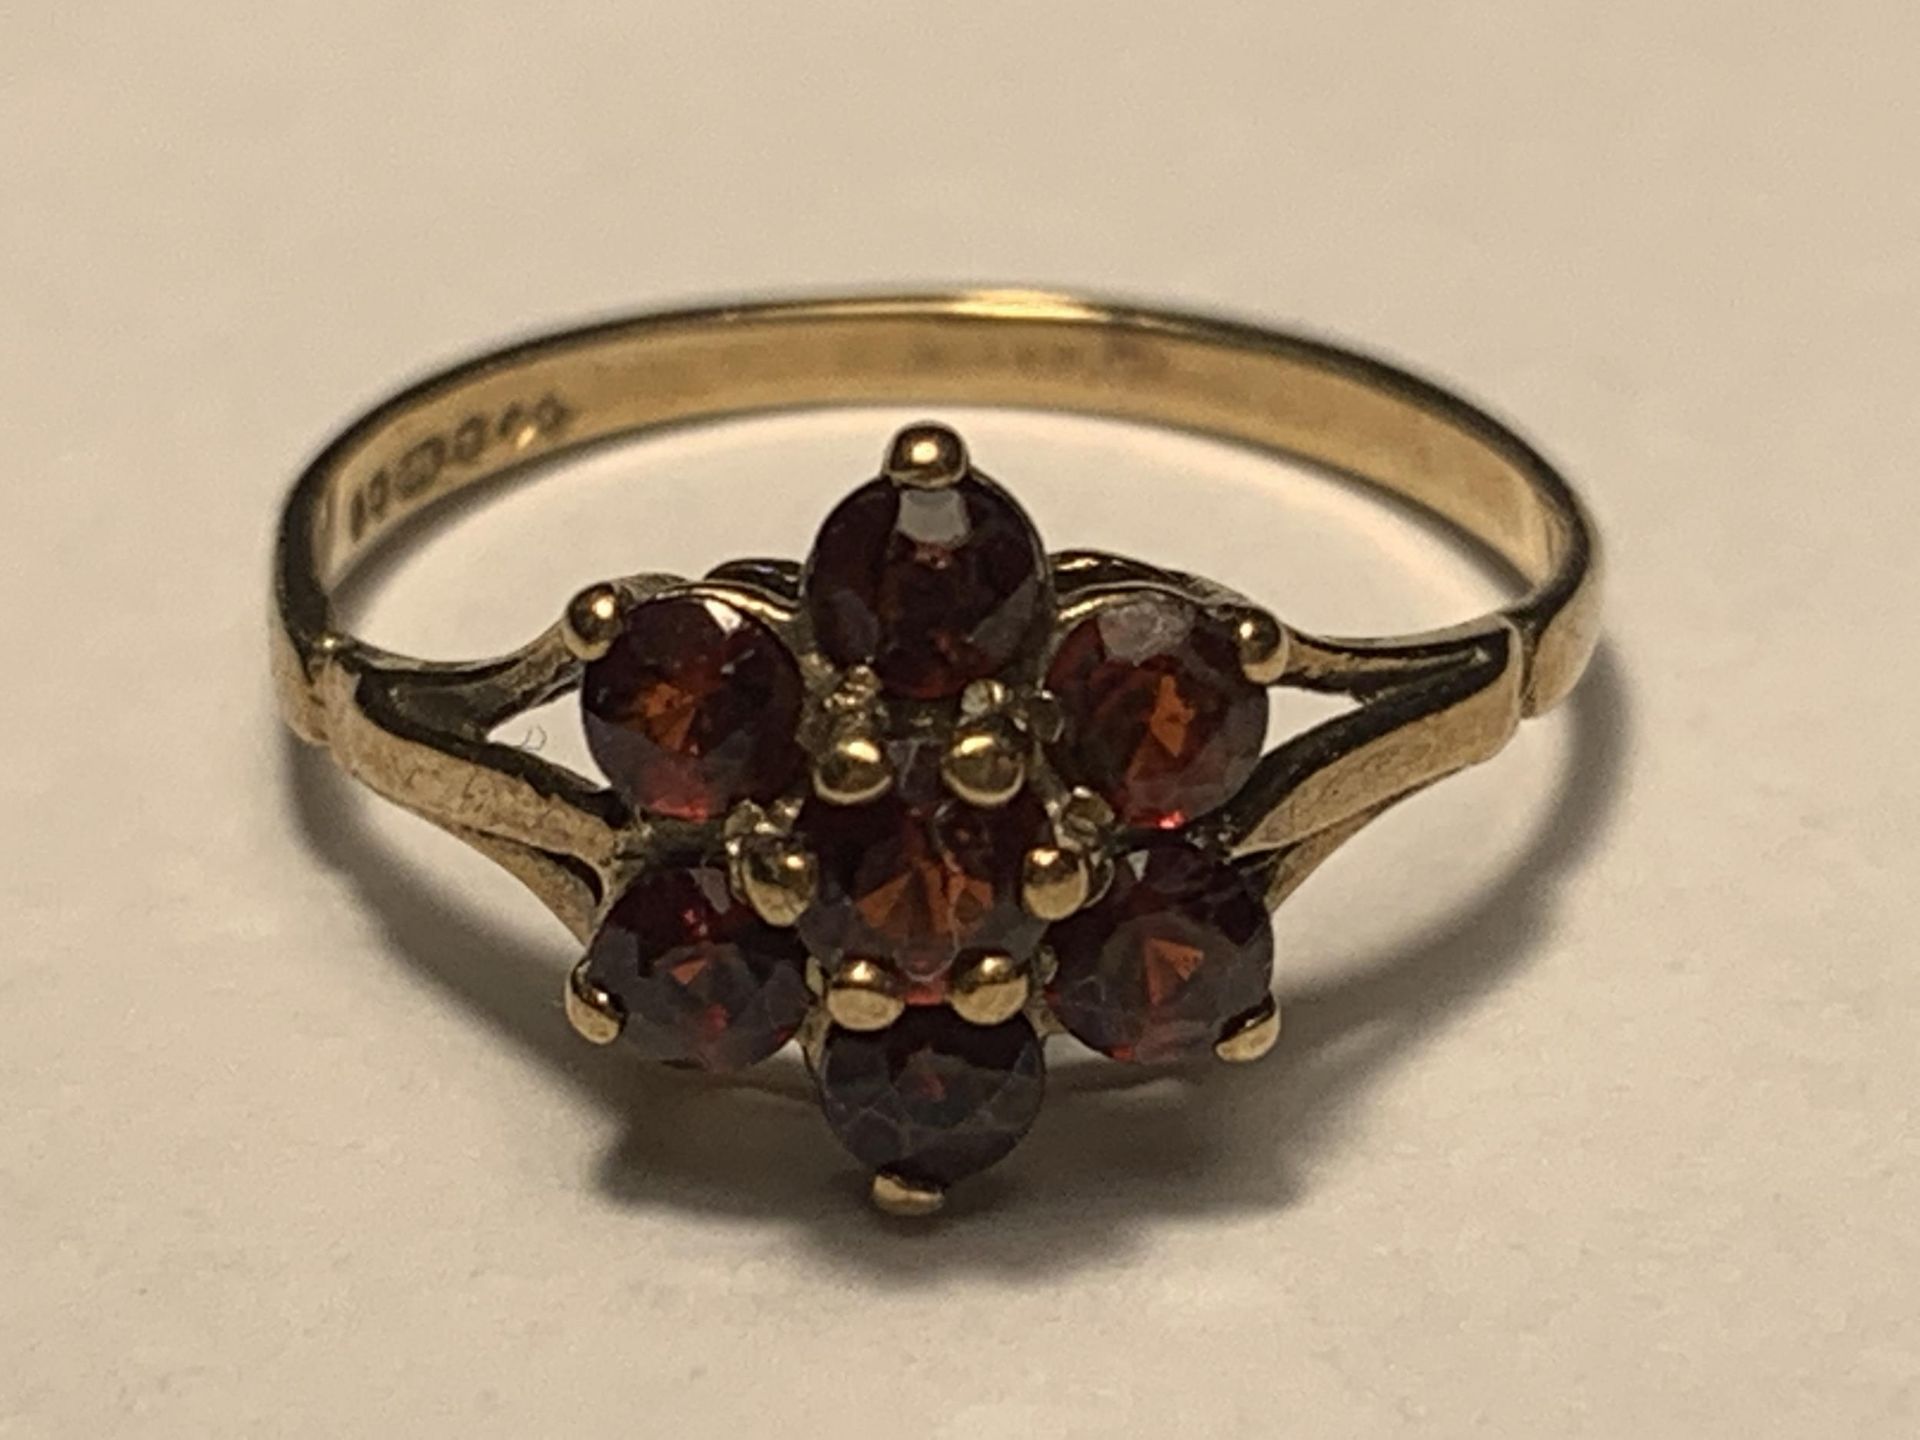 A 9 CARAT GOLD RING WITH SEVEN GARNETS IN A FLOWER DESIGN SIZE M